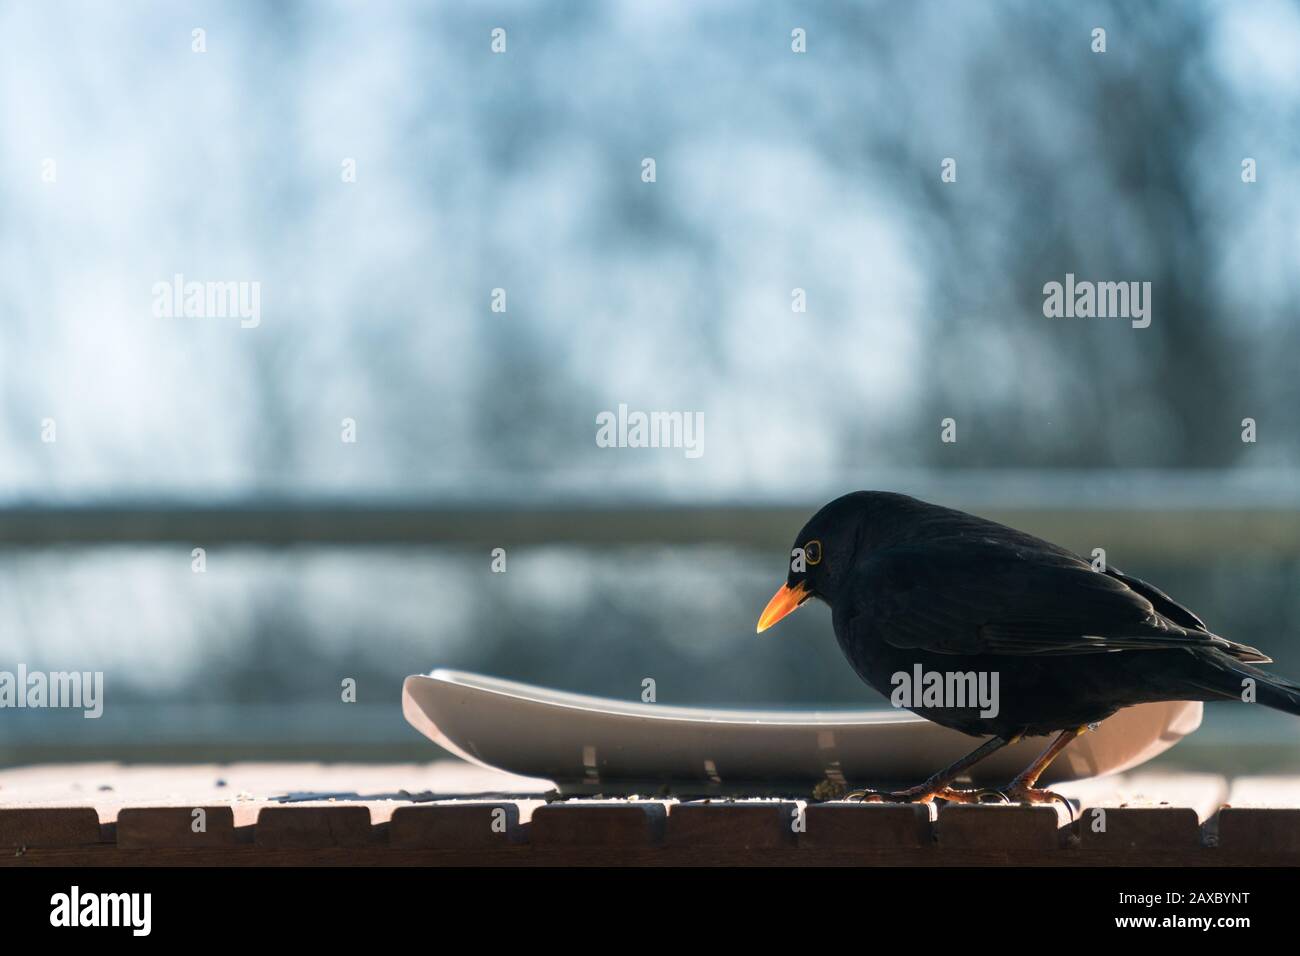 Male common blackbird (Turdus merula) eating from a plate on a balcony. Concept of animal welfare, protection of native species from food shortage Stock Photo